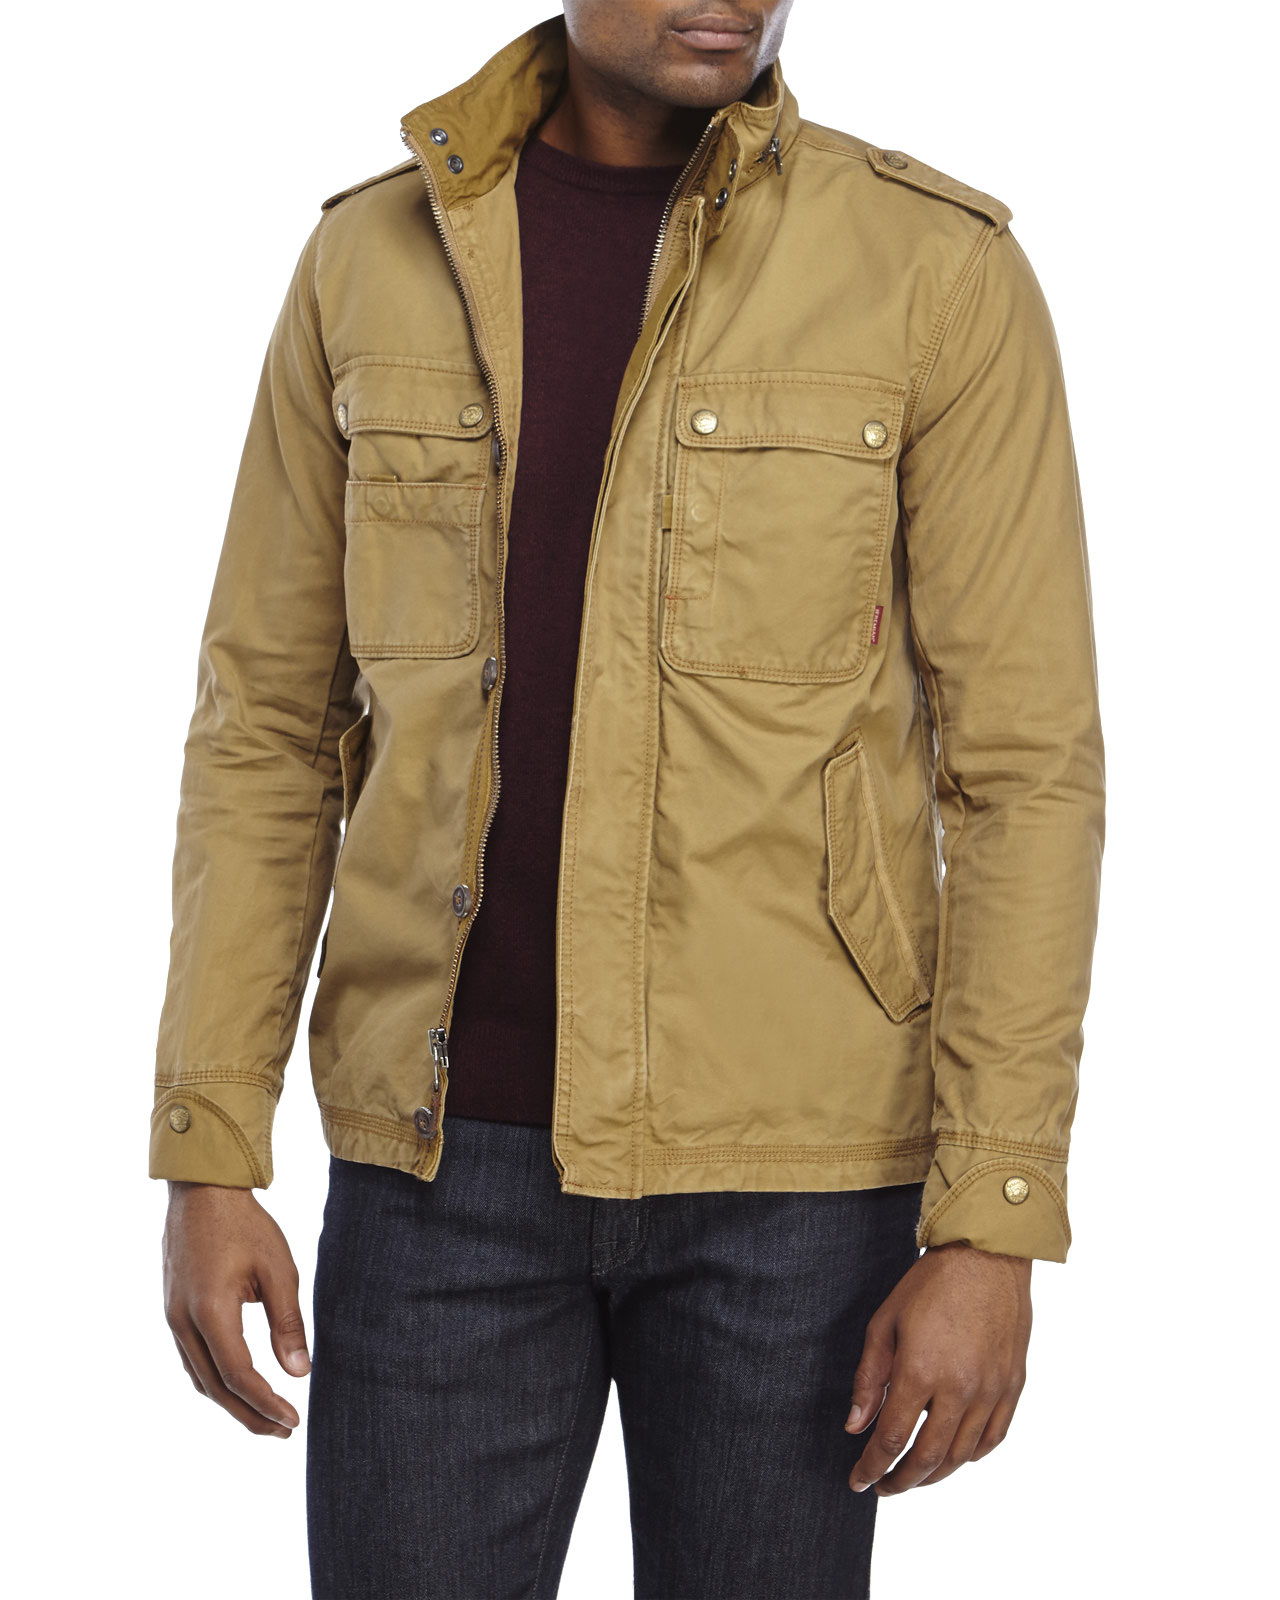 Lyst - Jeremiah Paxton Canvas Jacket in Natural for Men